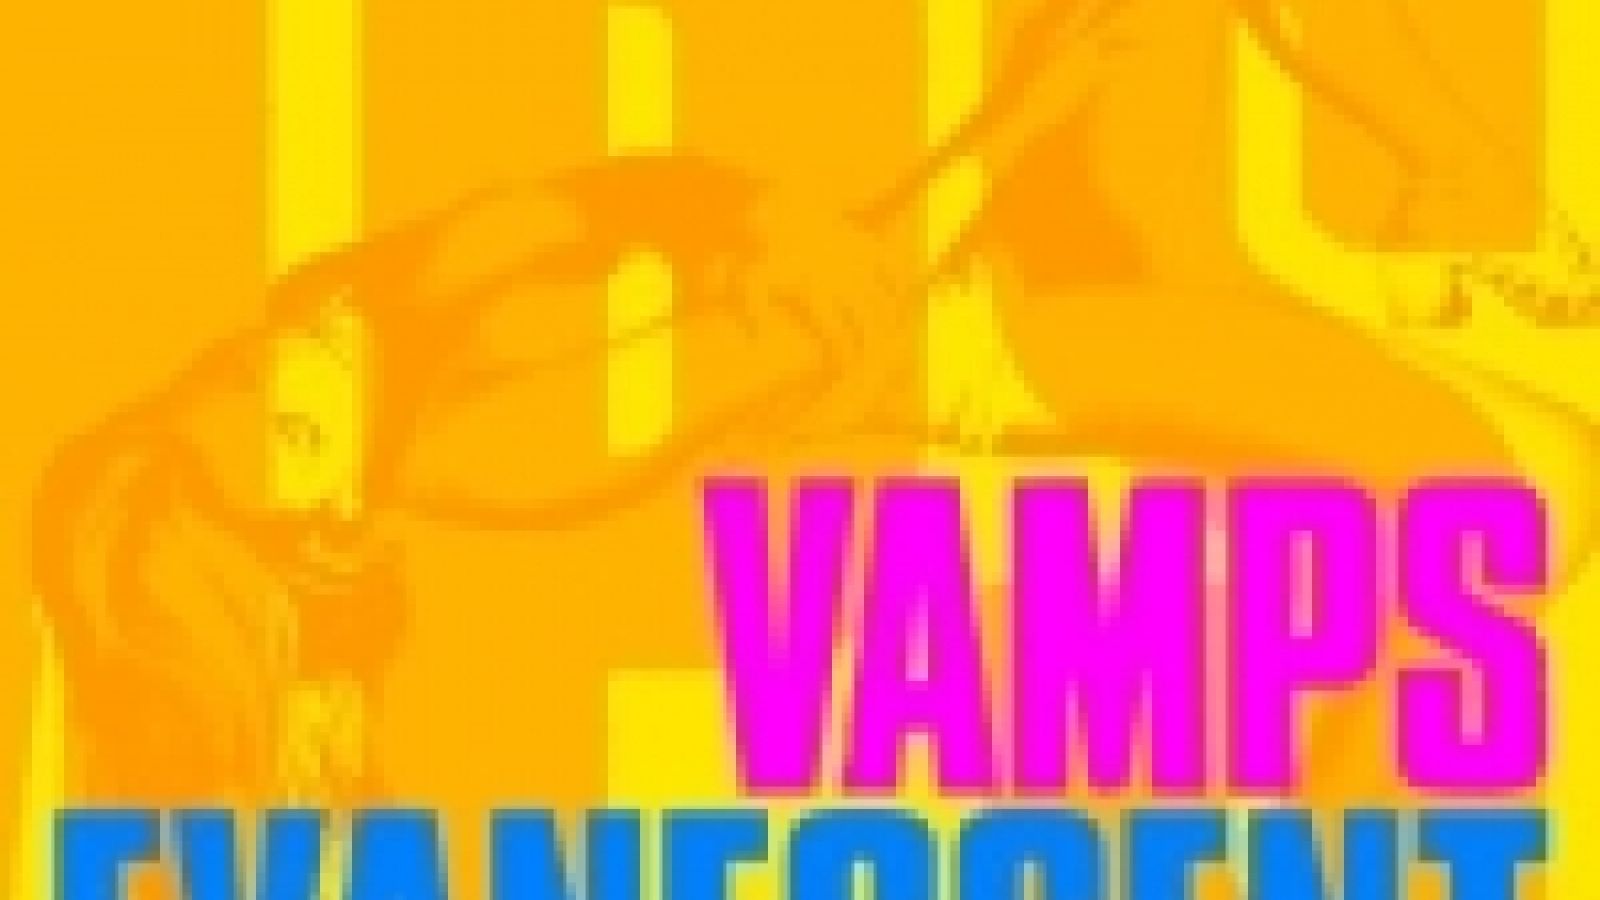 VAMPS - EVANESCENT © UNIVERSAL MUSIC LLC. All rights reserved.